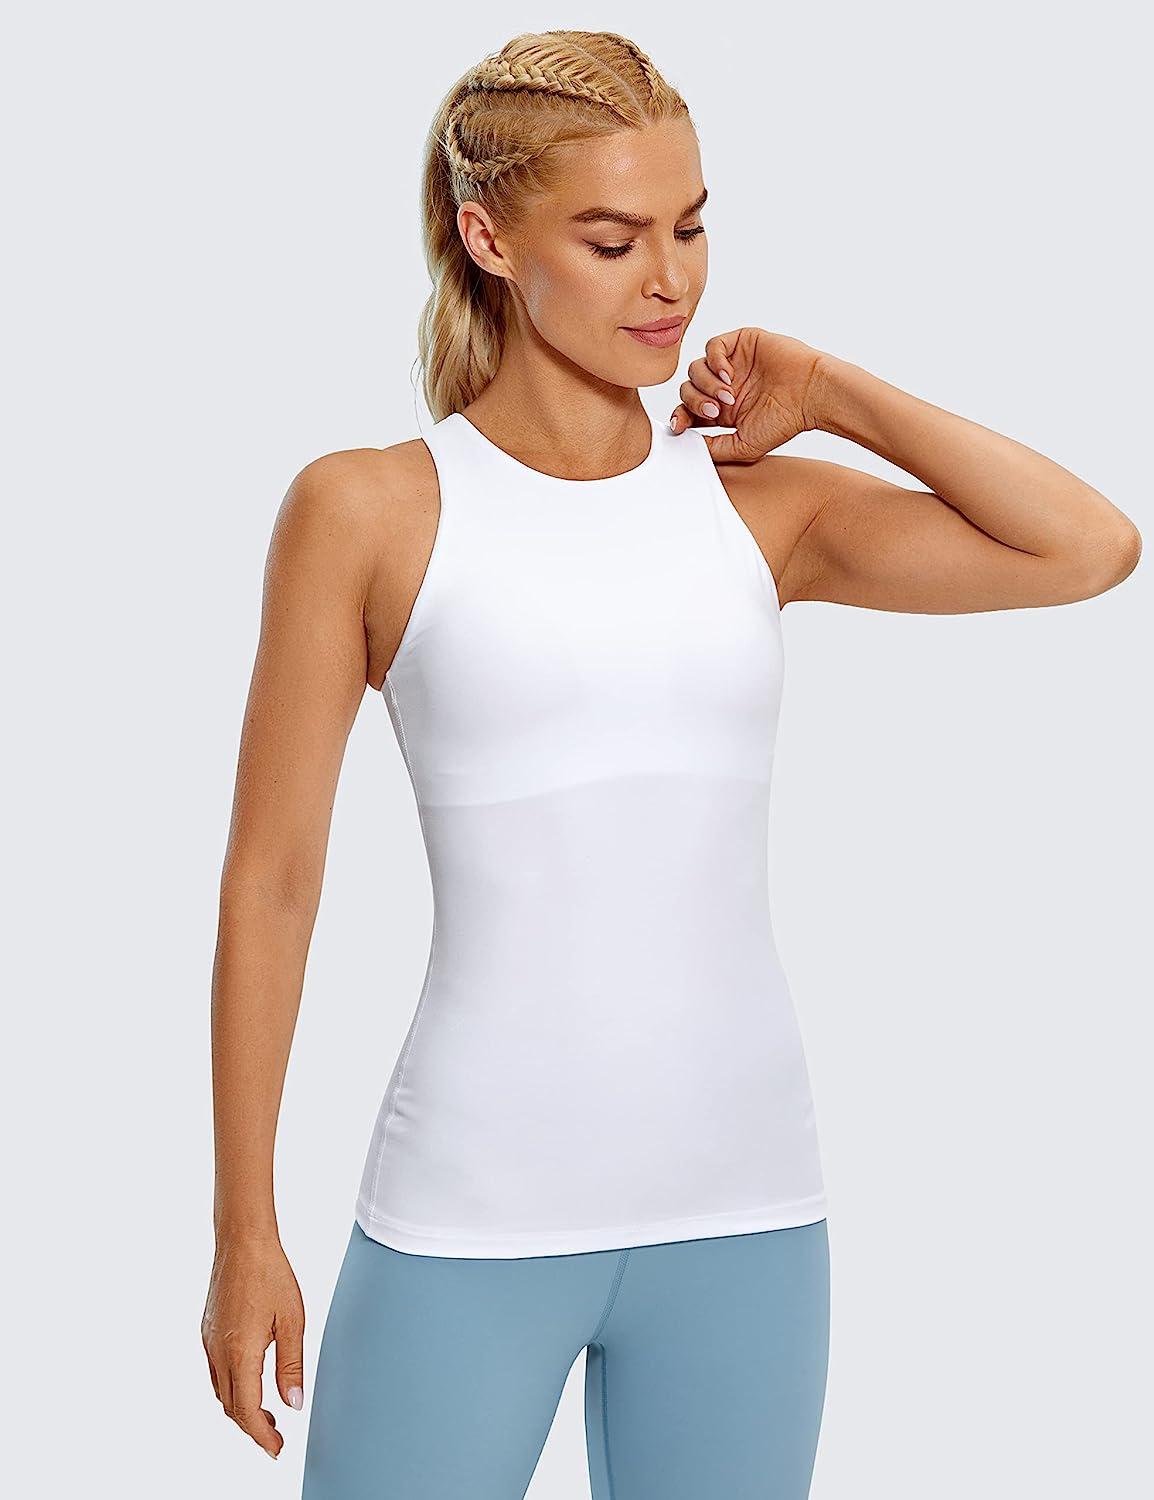 CRZ YOGA Womens High Neck Workout Tank Tops - with Built-in Shelf